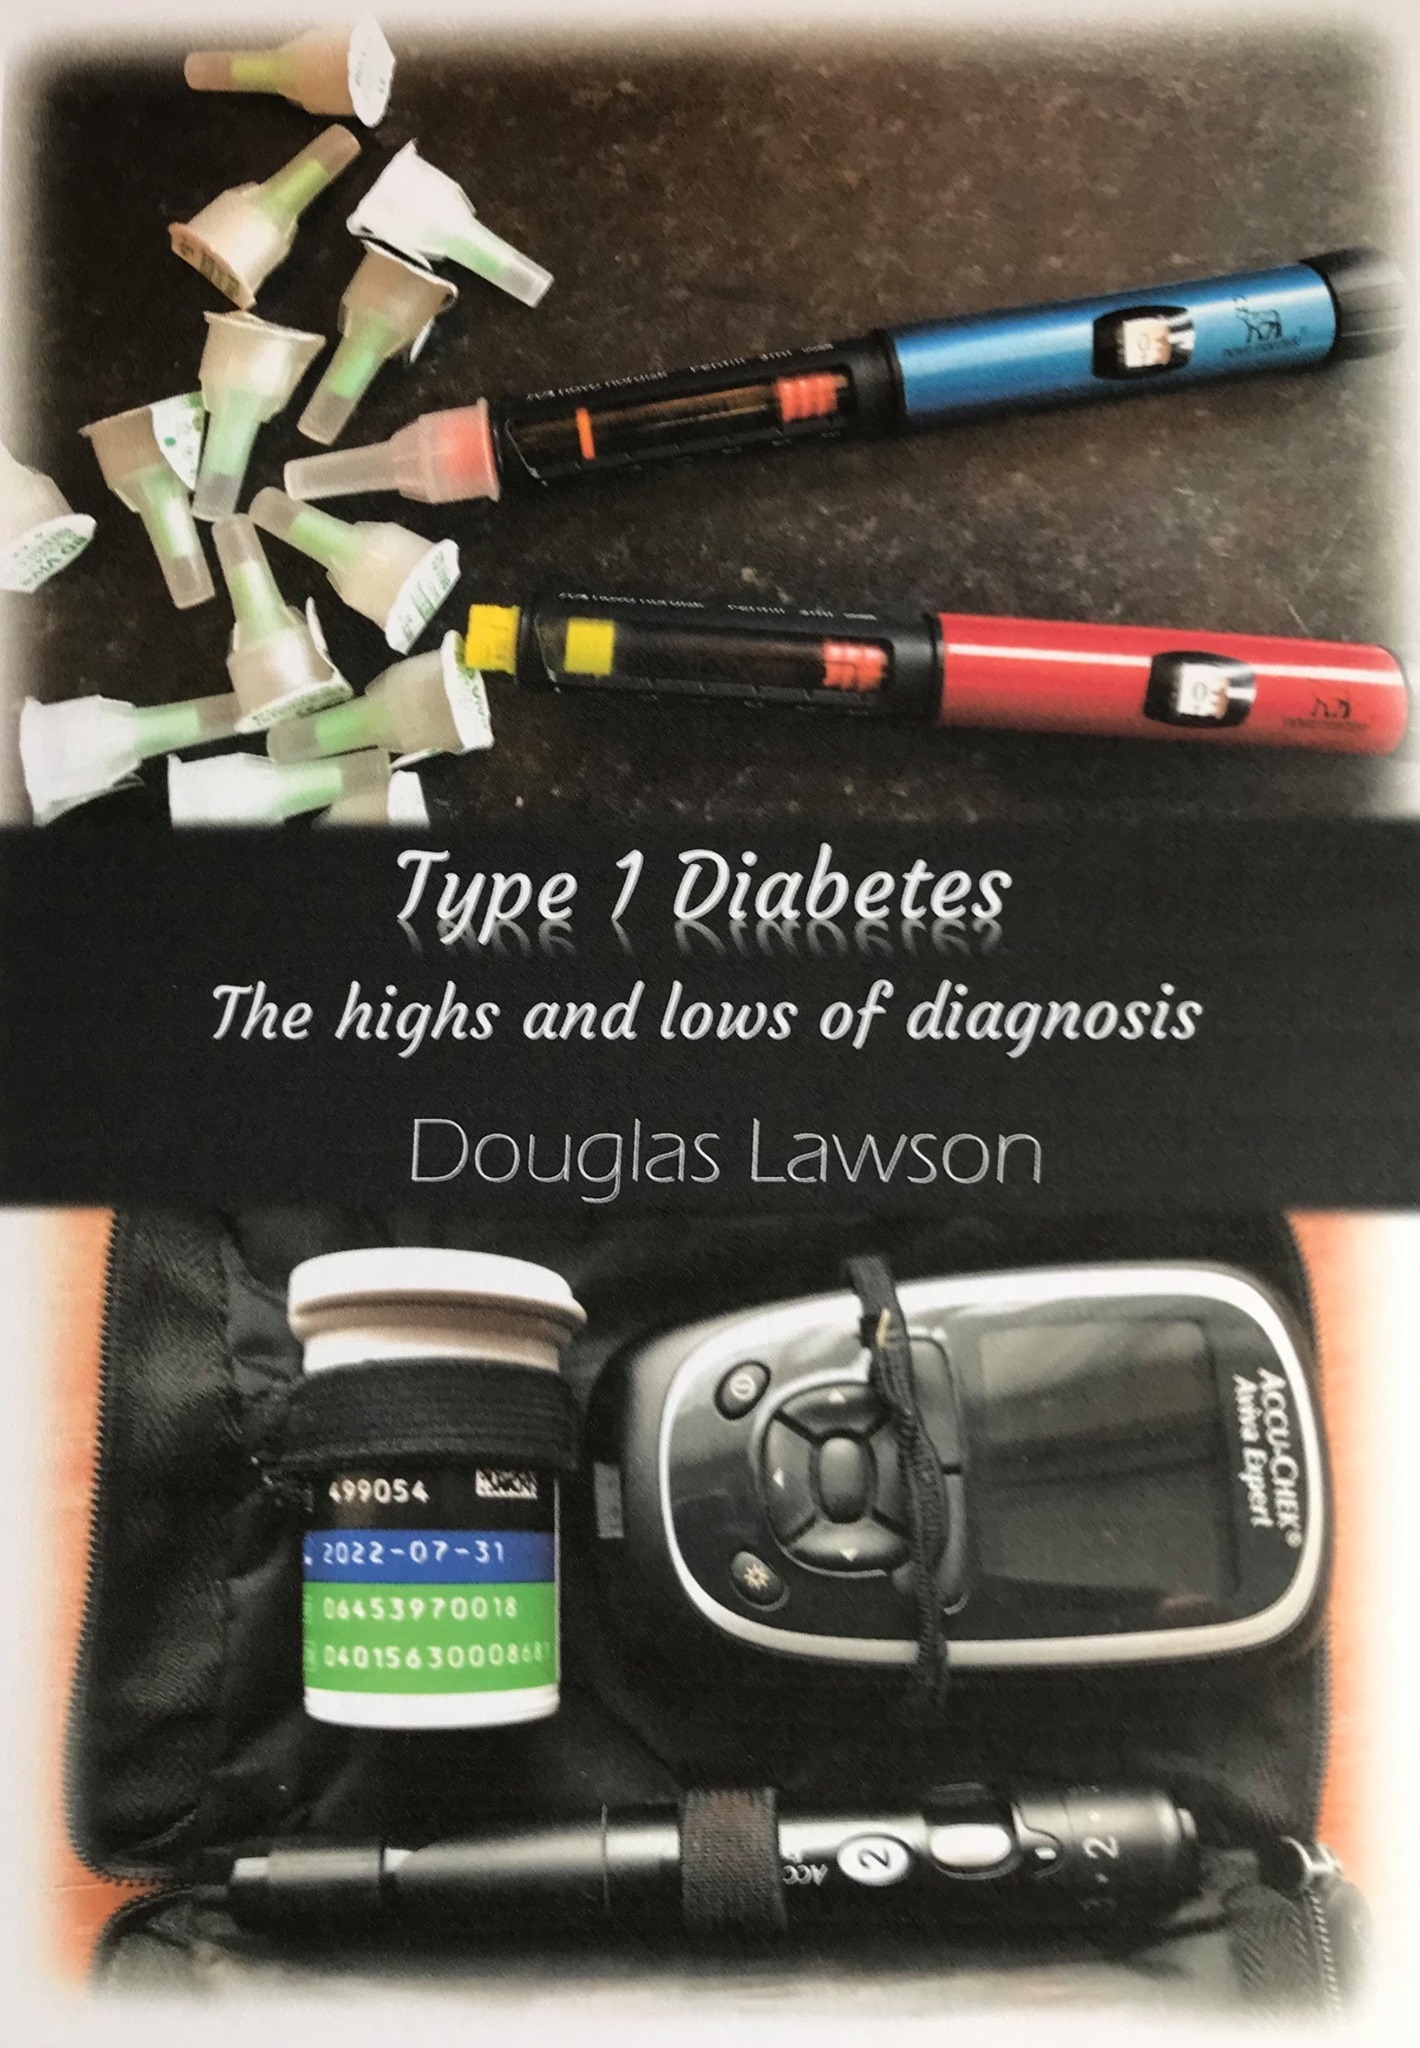 FREE: Type 1 Diabetes: The highs and lows of diagnosis by Douglas Lawson by Douglas Lawson